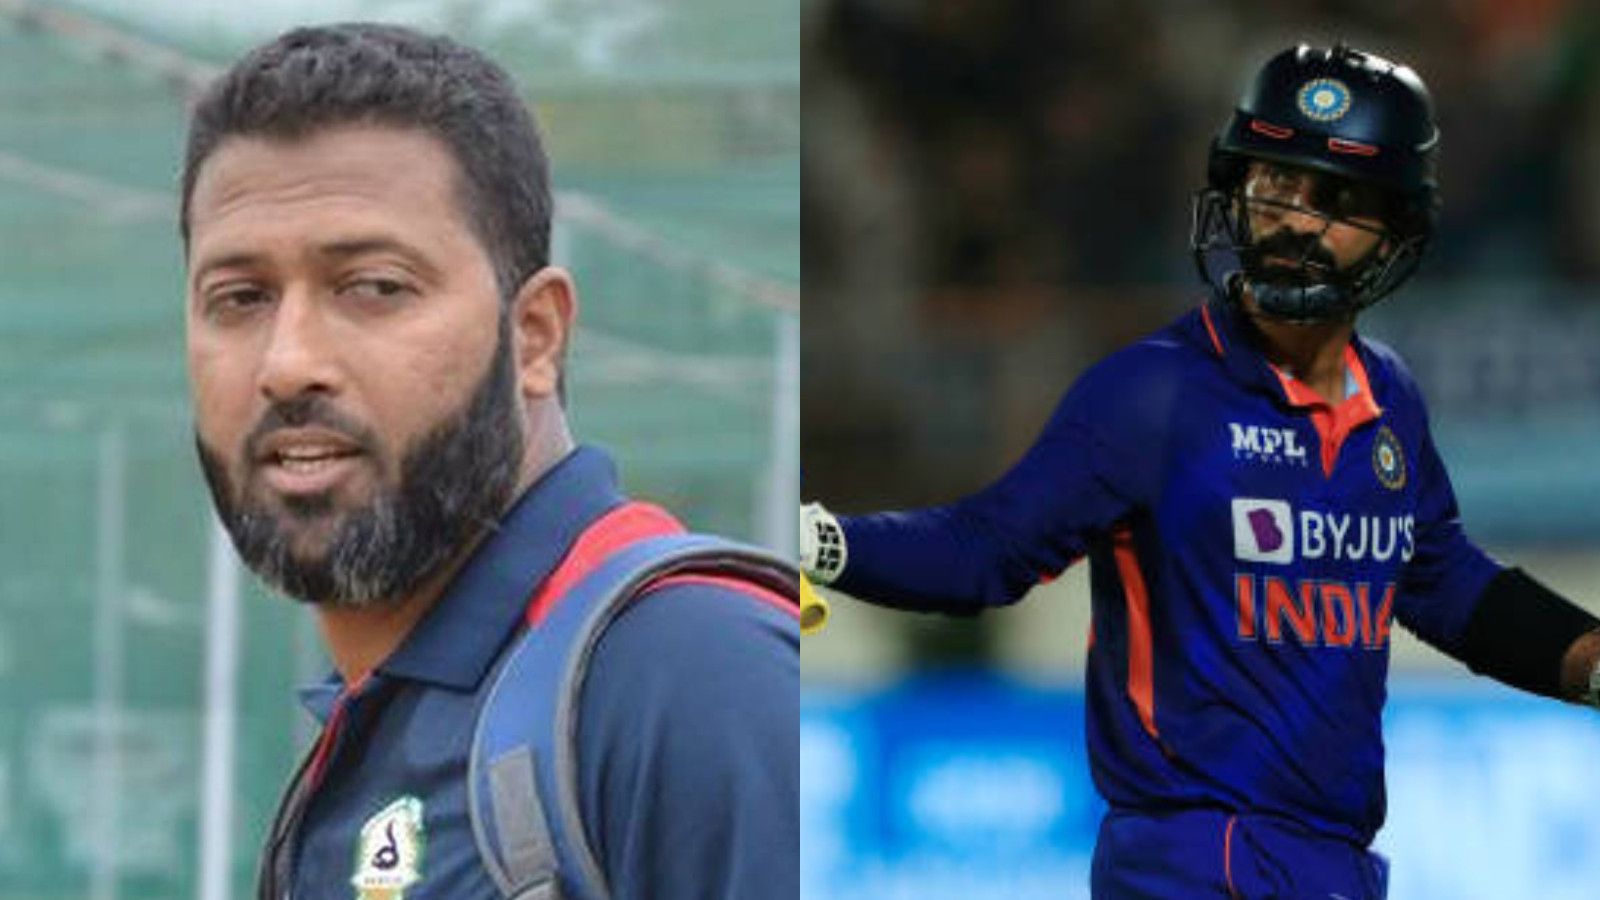 IND v SA 2022: 'I really feel happy that he showed a never-say-die attitude' - Wasim Jaffer speaks highly of Dinesh Karthik